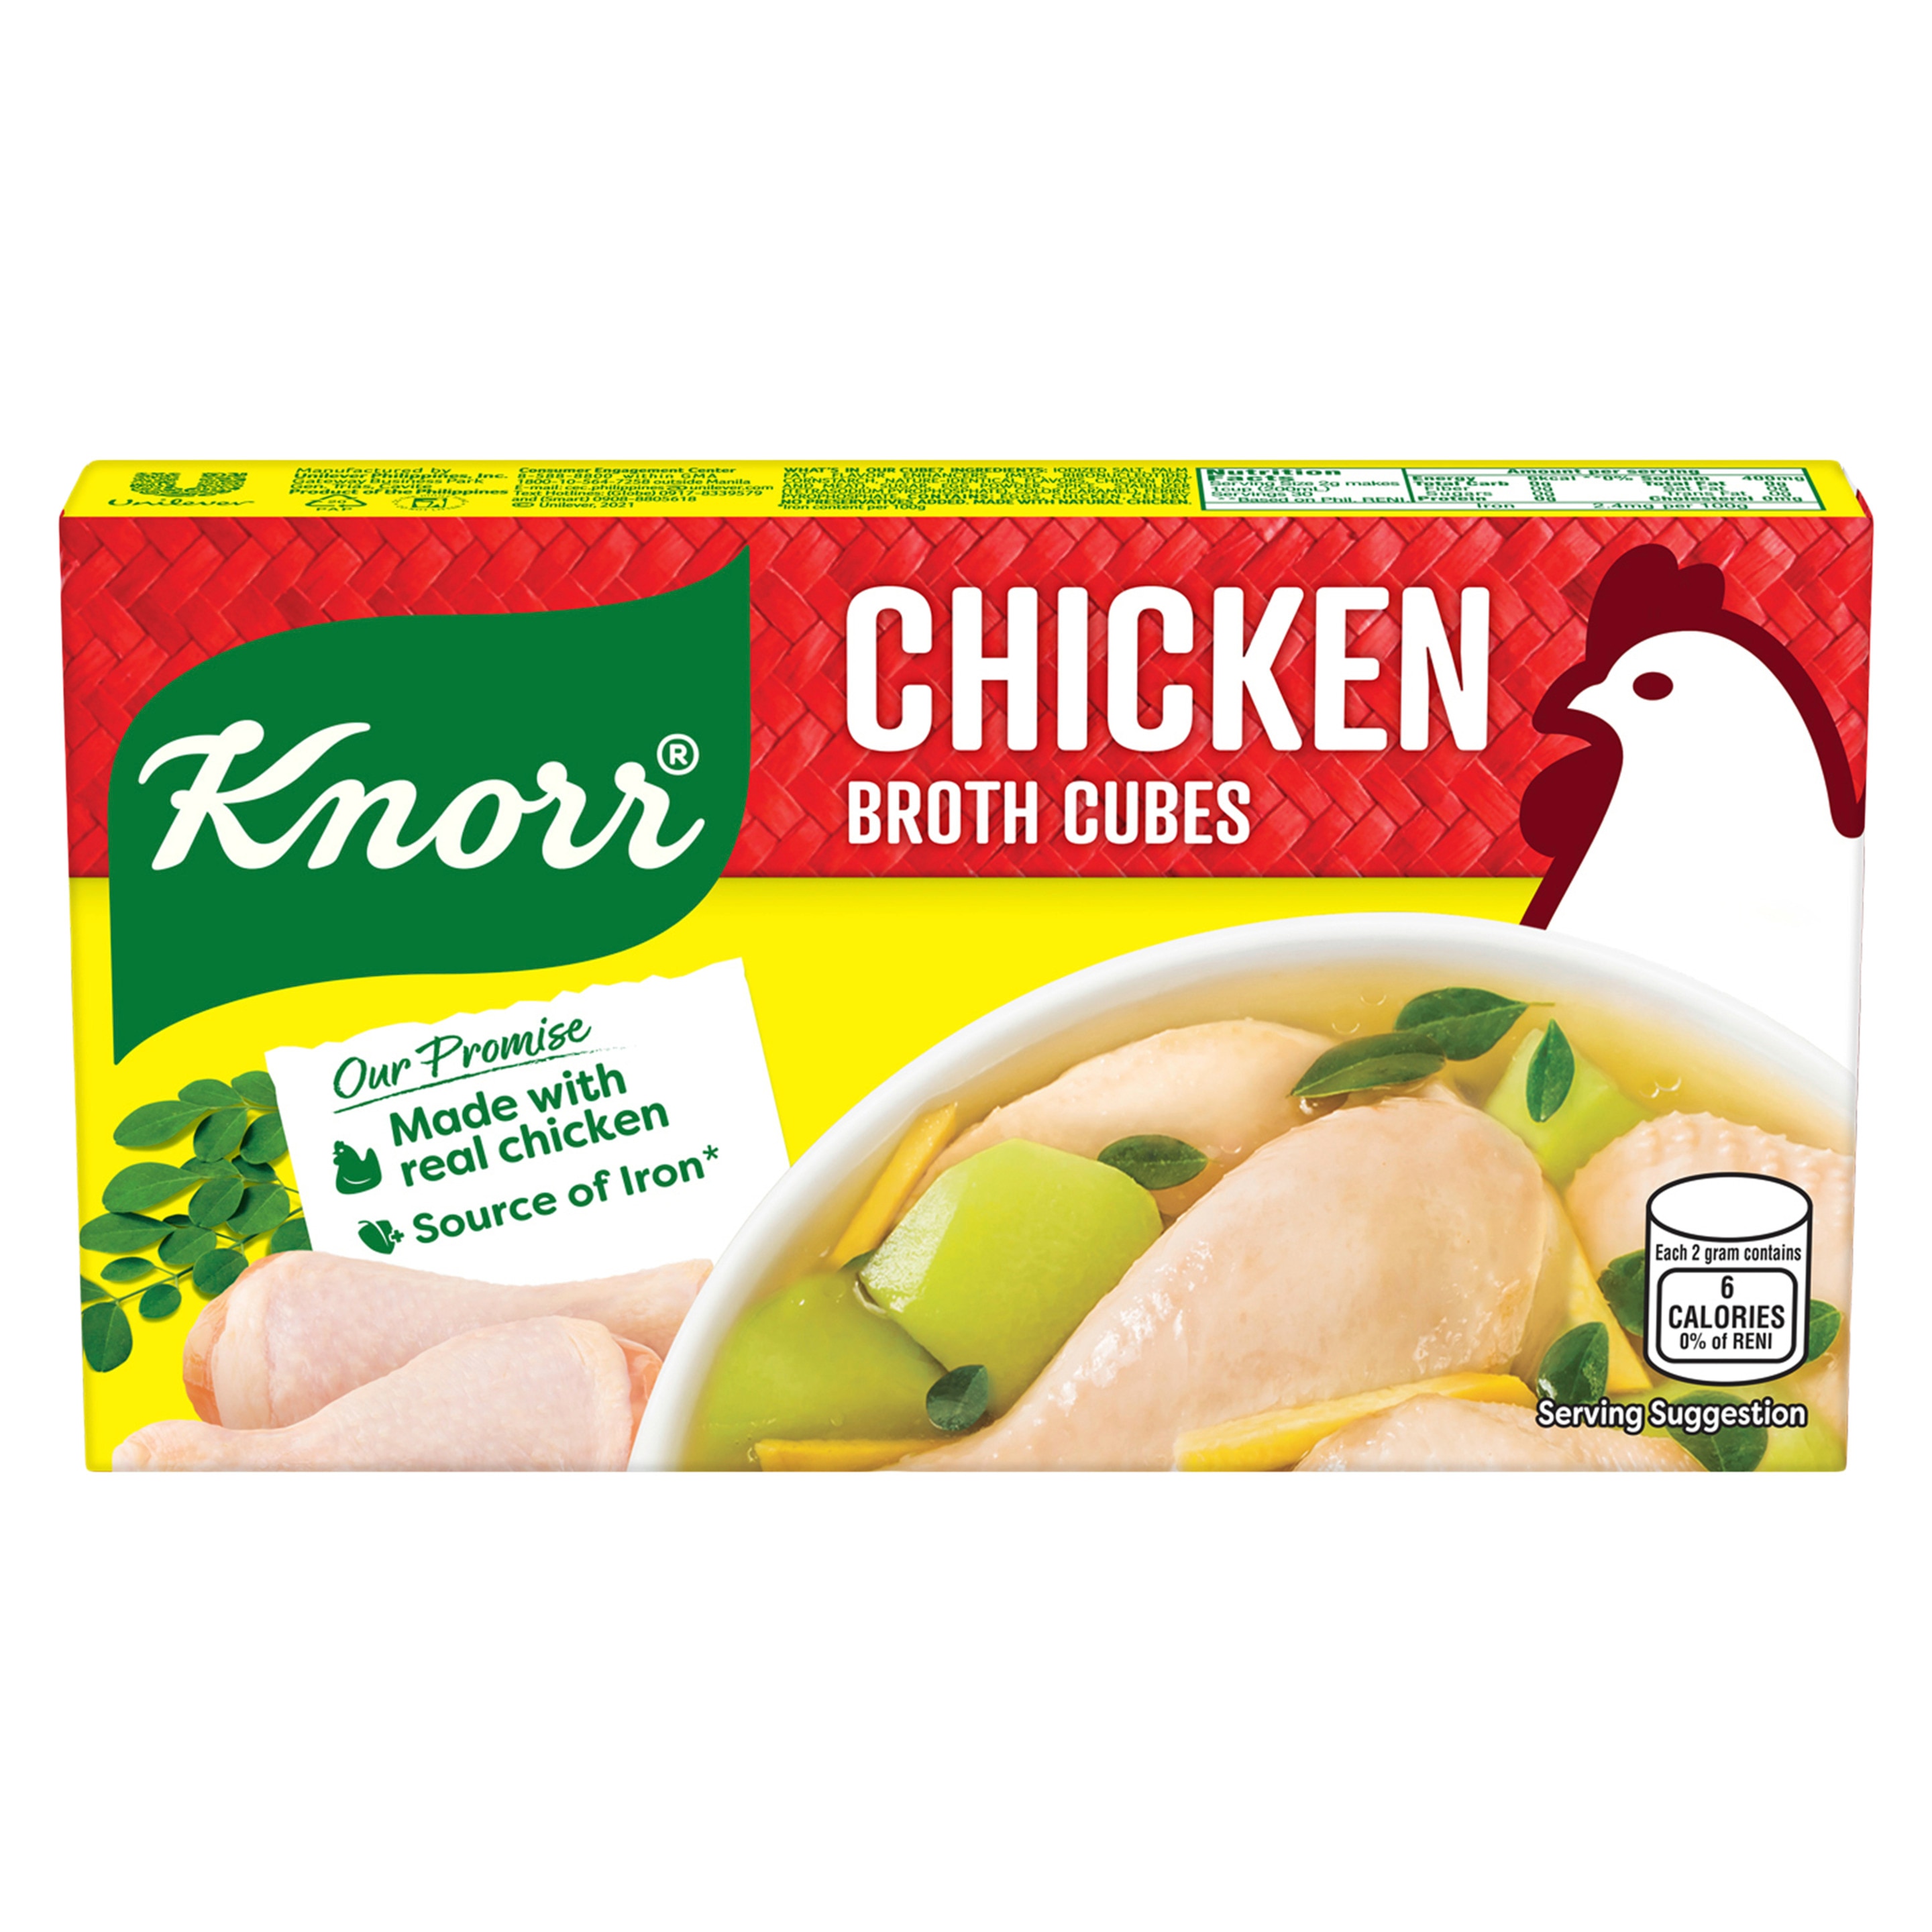 A box of Knorr Chicken Broth Cubes